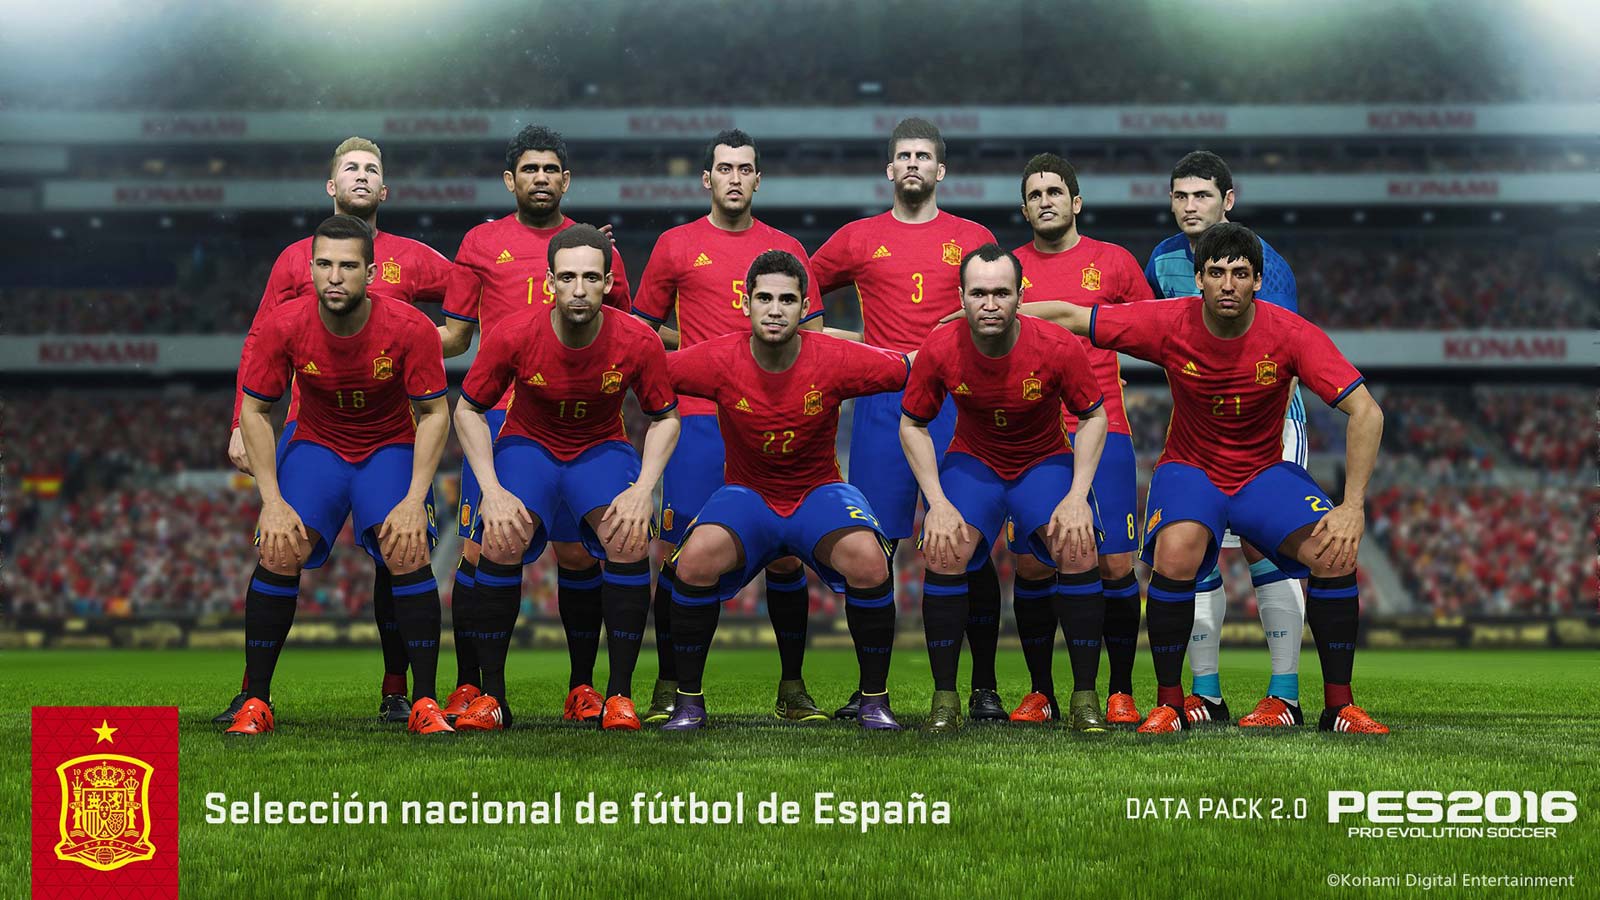 PES 2016 Data Pack 2 to Feature New National Team Kits